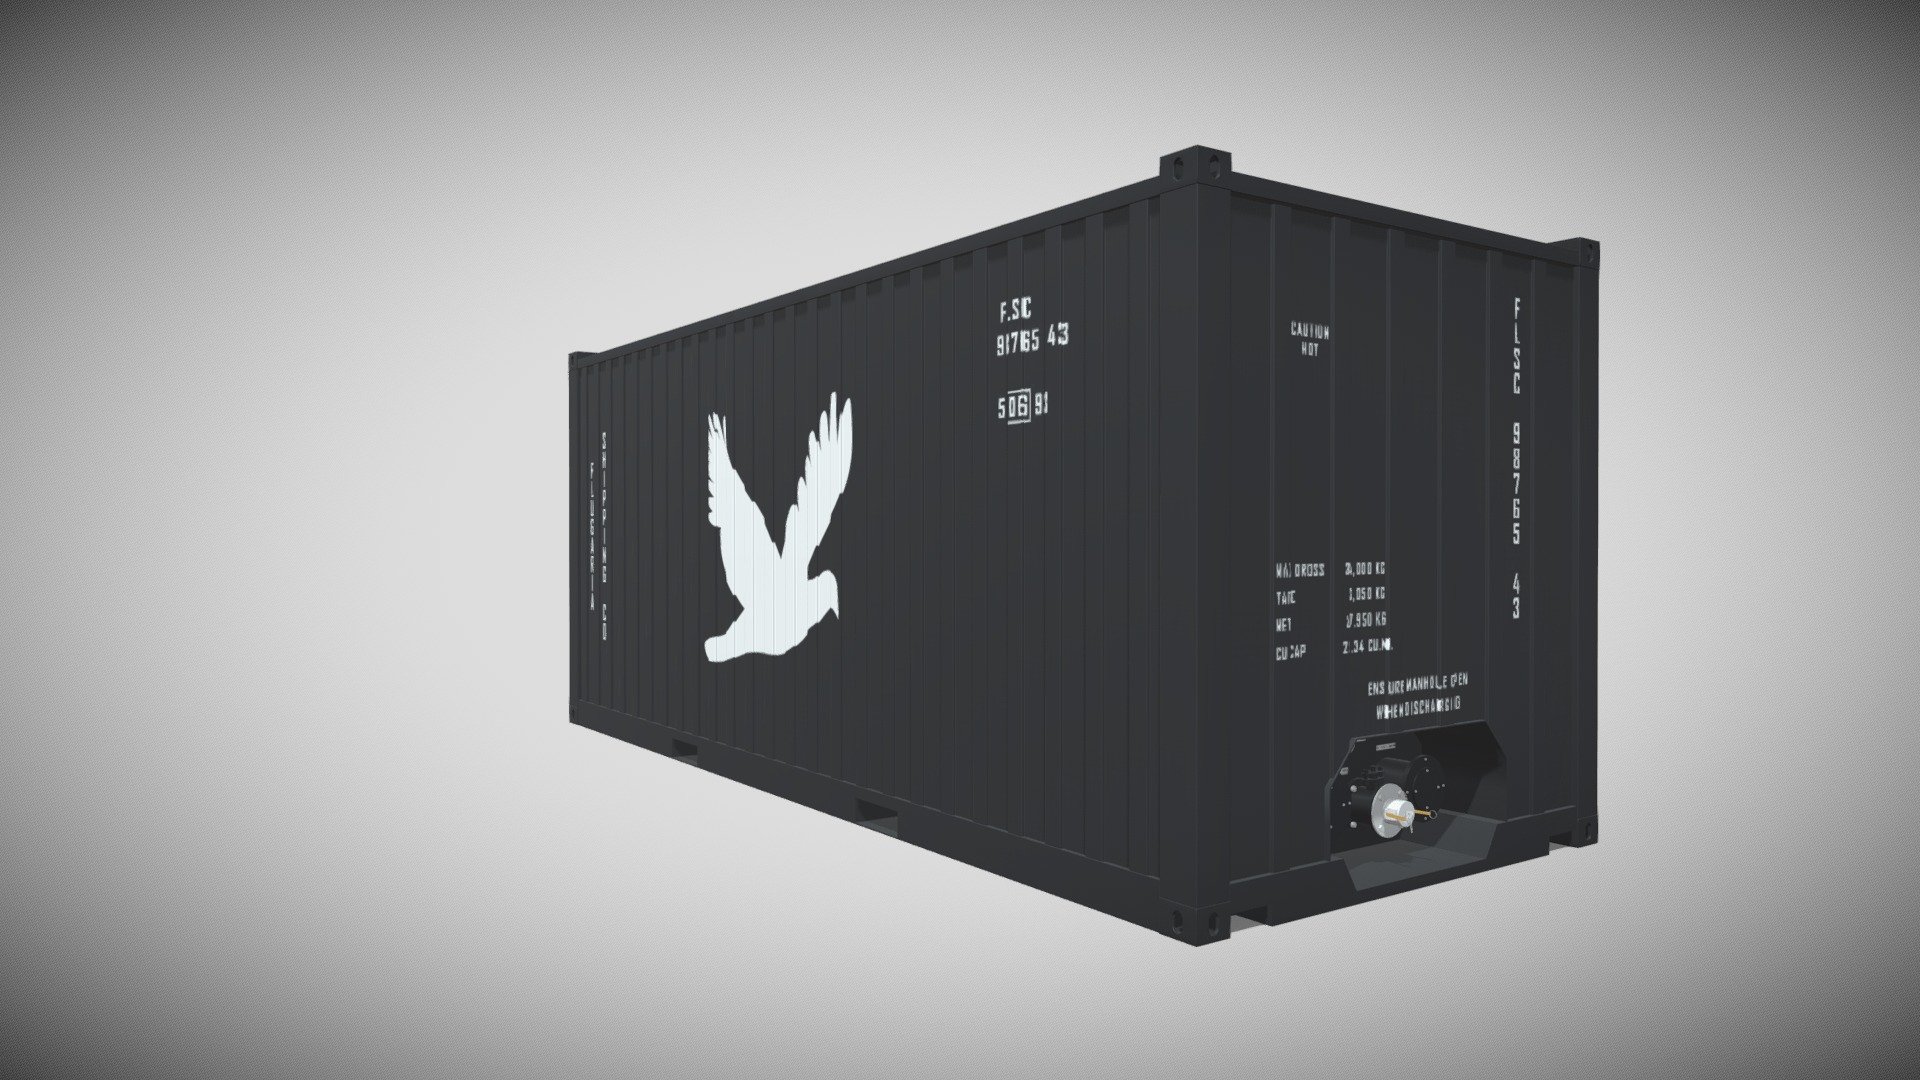 Detailed model of a 20ft Bitumen Box Container, modeled in Cinema 4D.The model was created using approximate real world dimensions.

The model has 47,012 polys and 47,131 vertices.

An additional file has been provided containing the original Cinema 4D project files with both standard and v-ray materials, textures and other 3d export files such as 3ds, fbx and obj 3d model